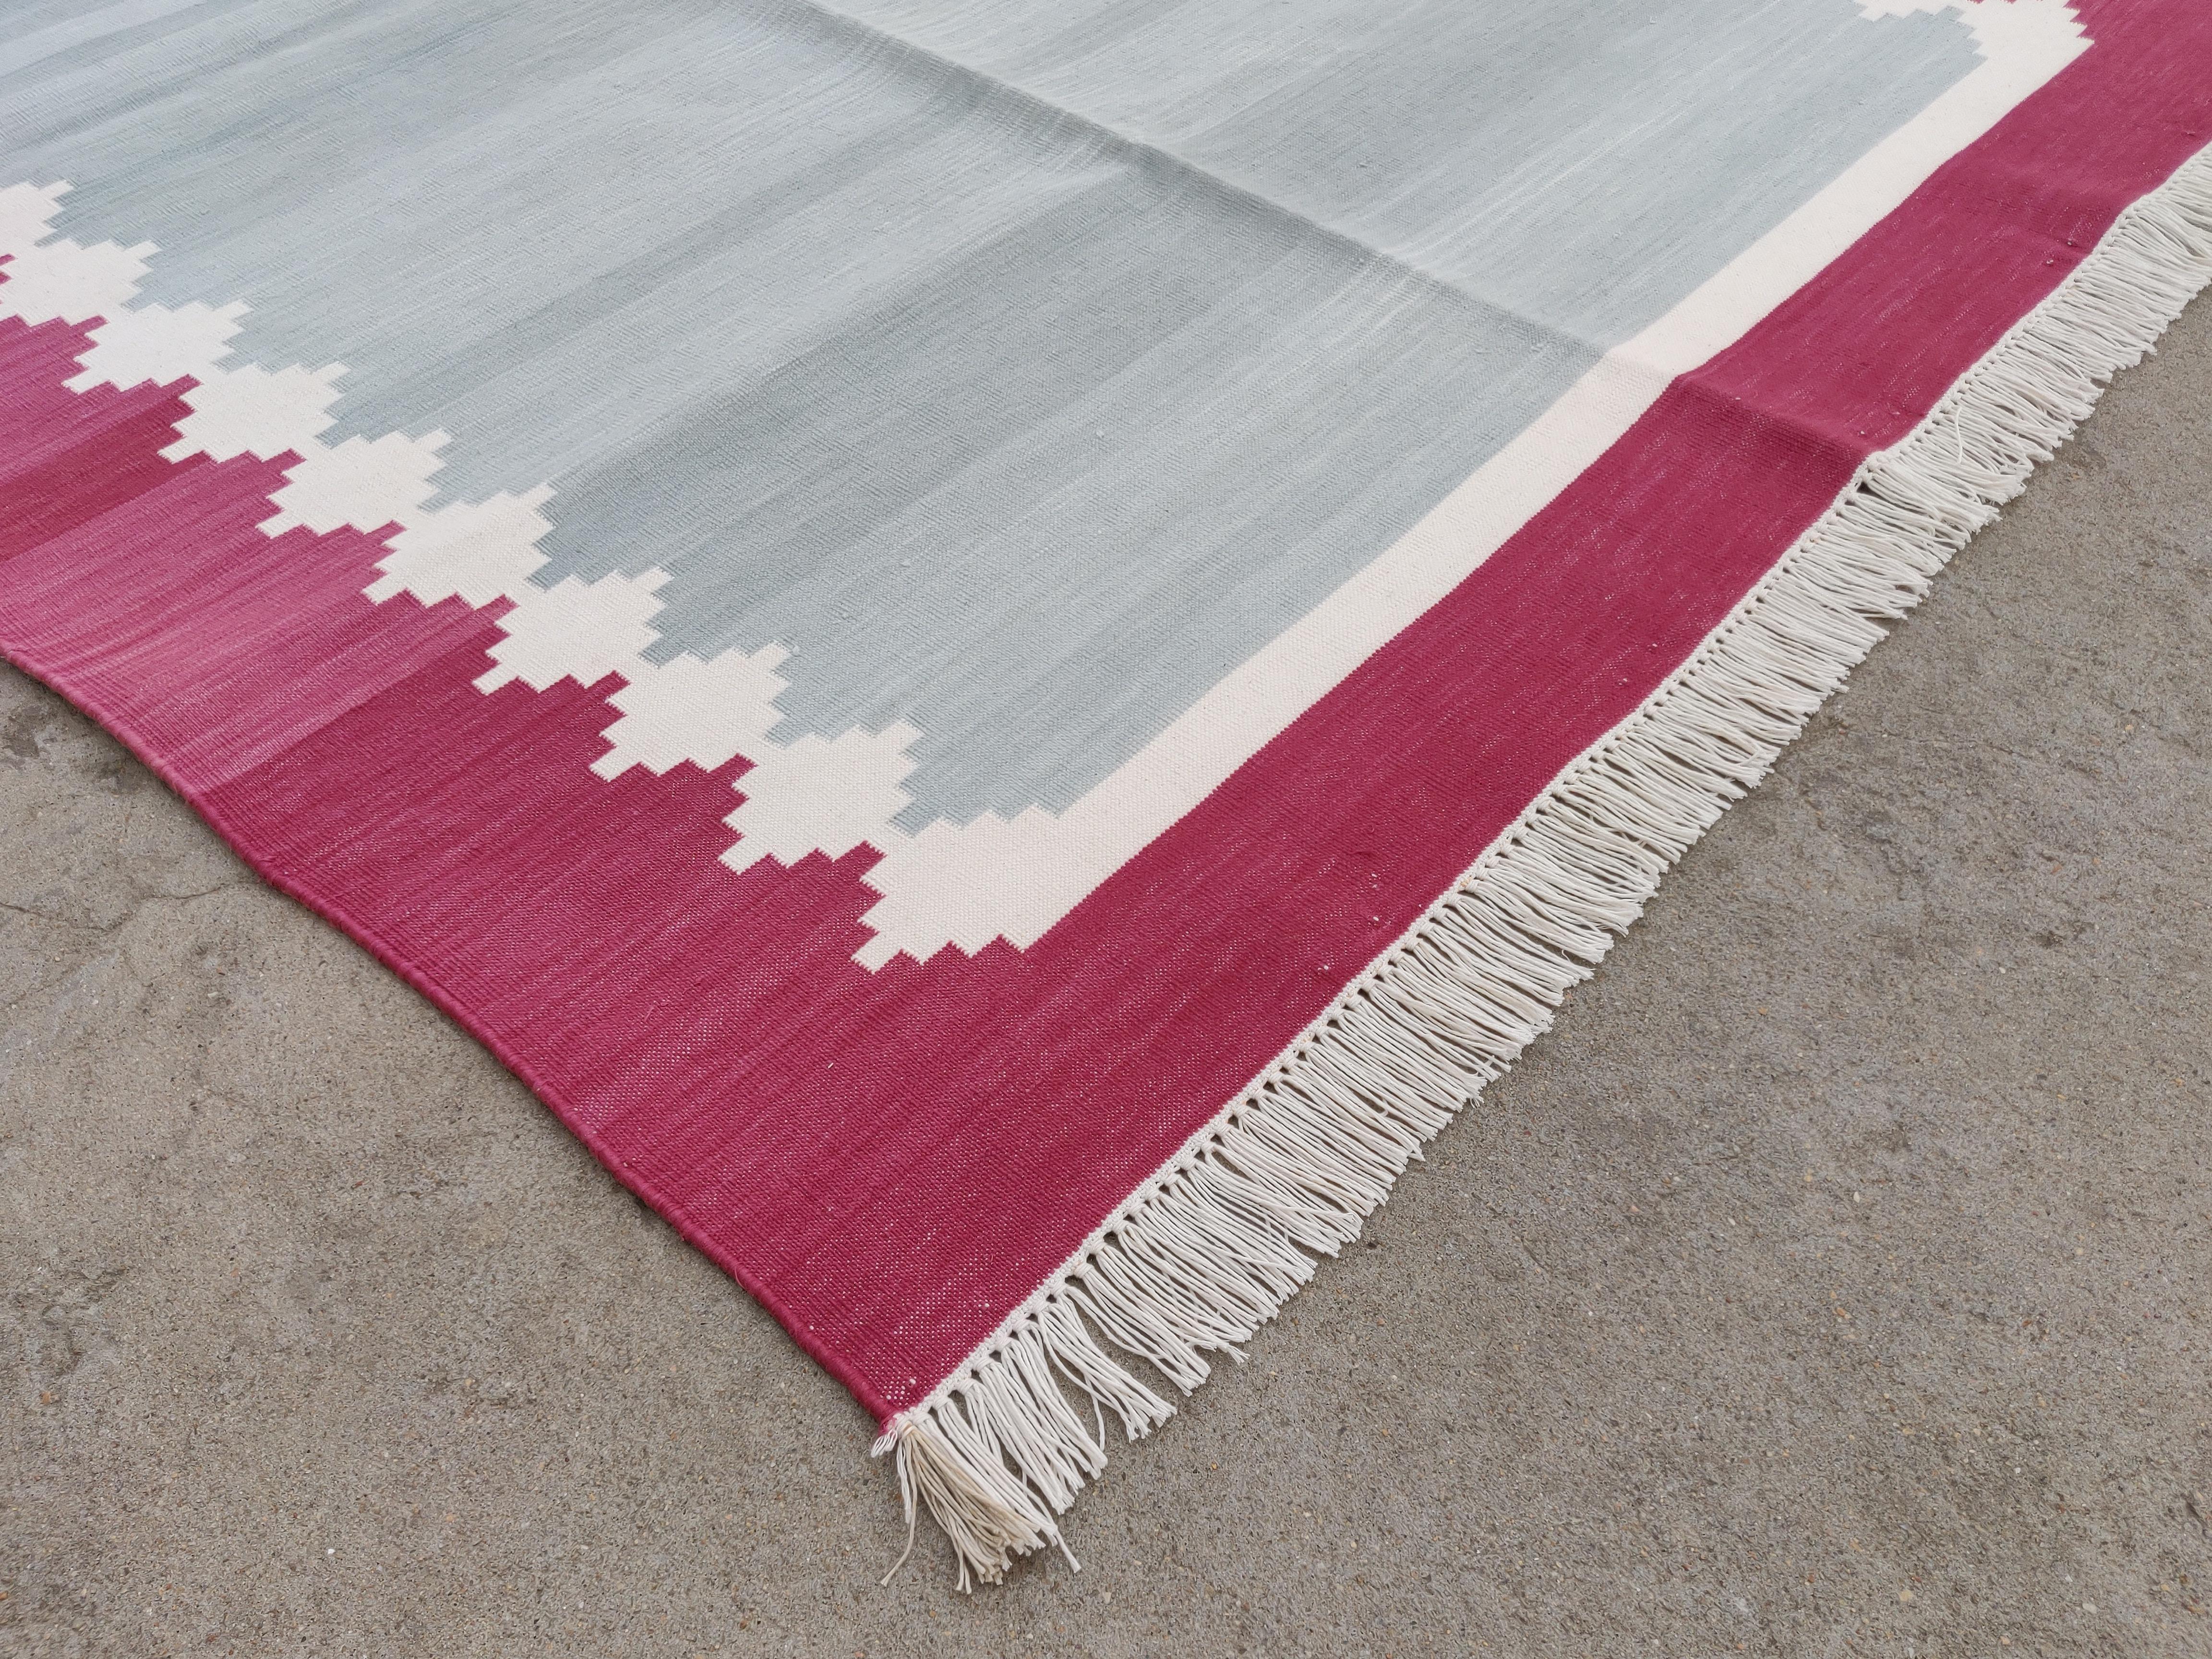 Hand-Woven Handmade Cotton Area Flat Weave Rug, 4x6 Grey And Pink Striped Indian Dhurrie For Sale